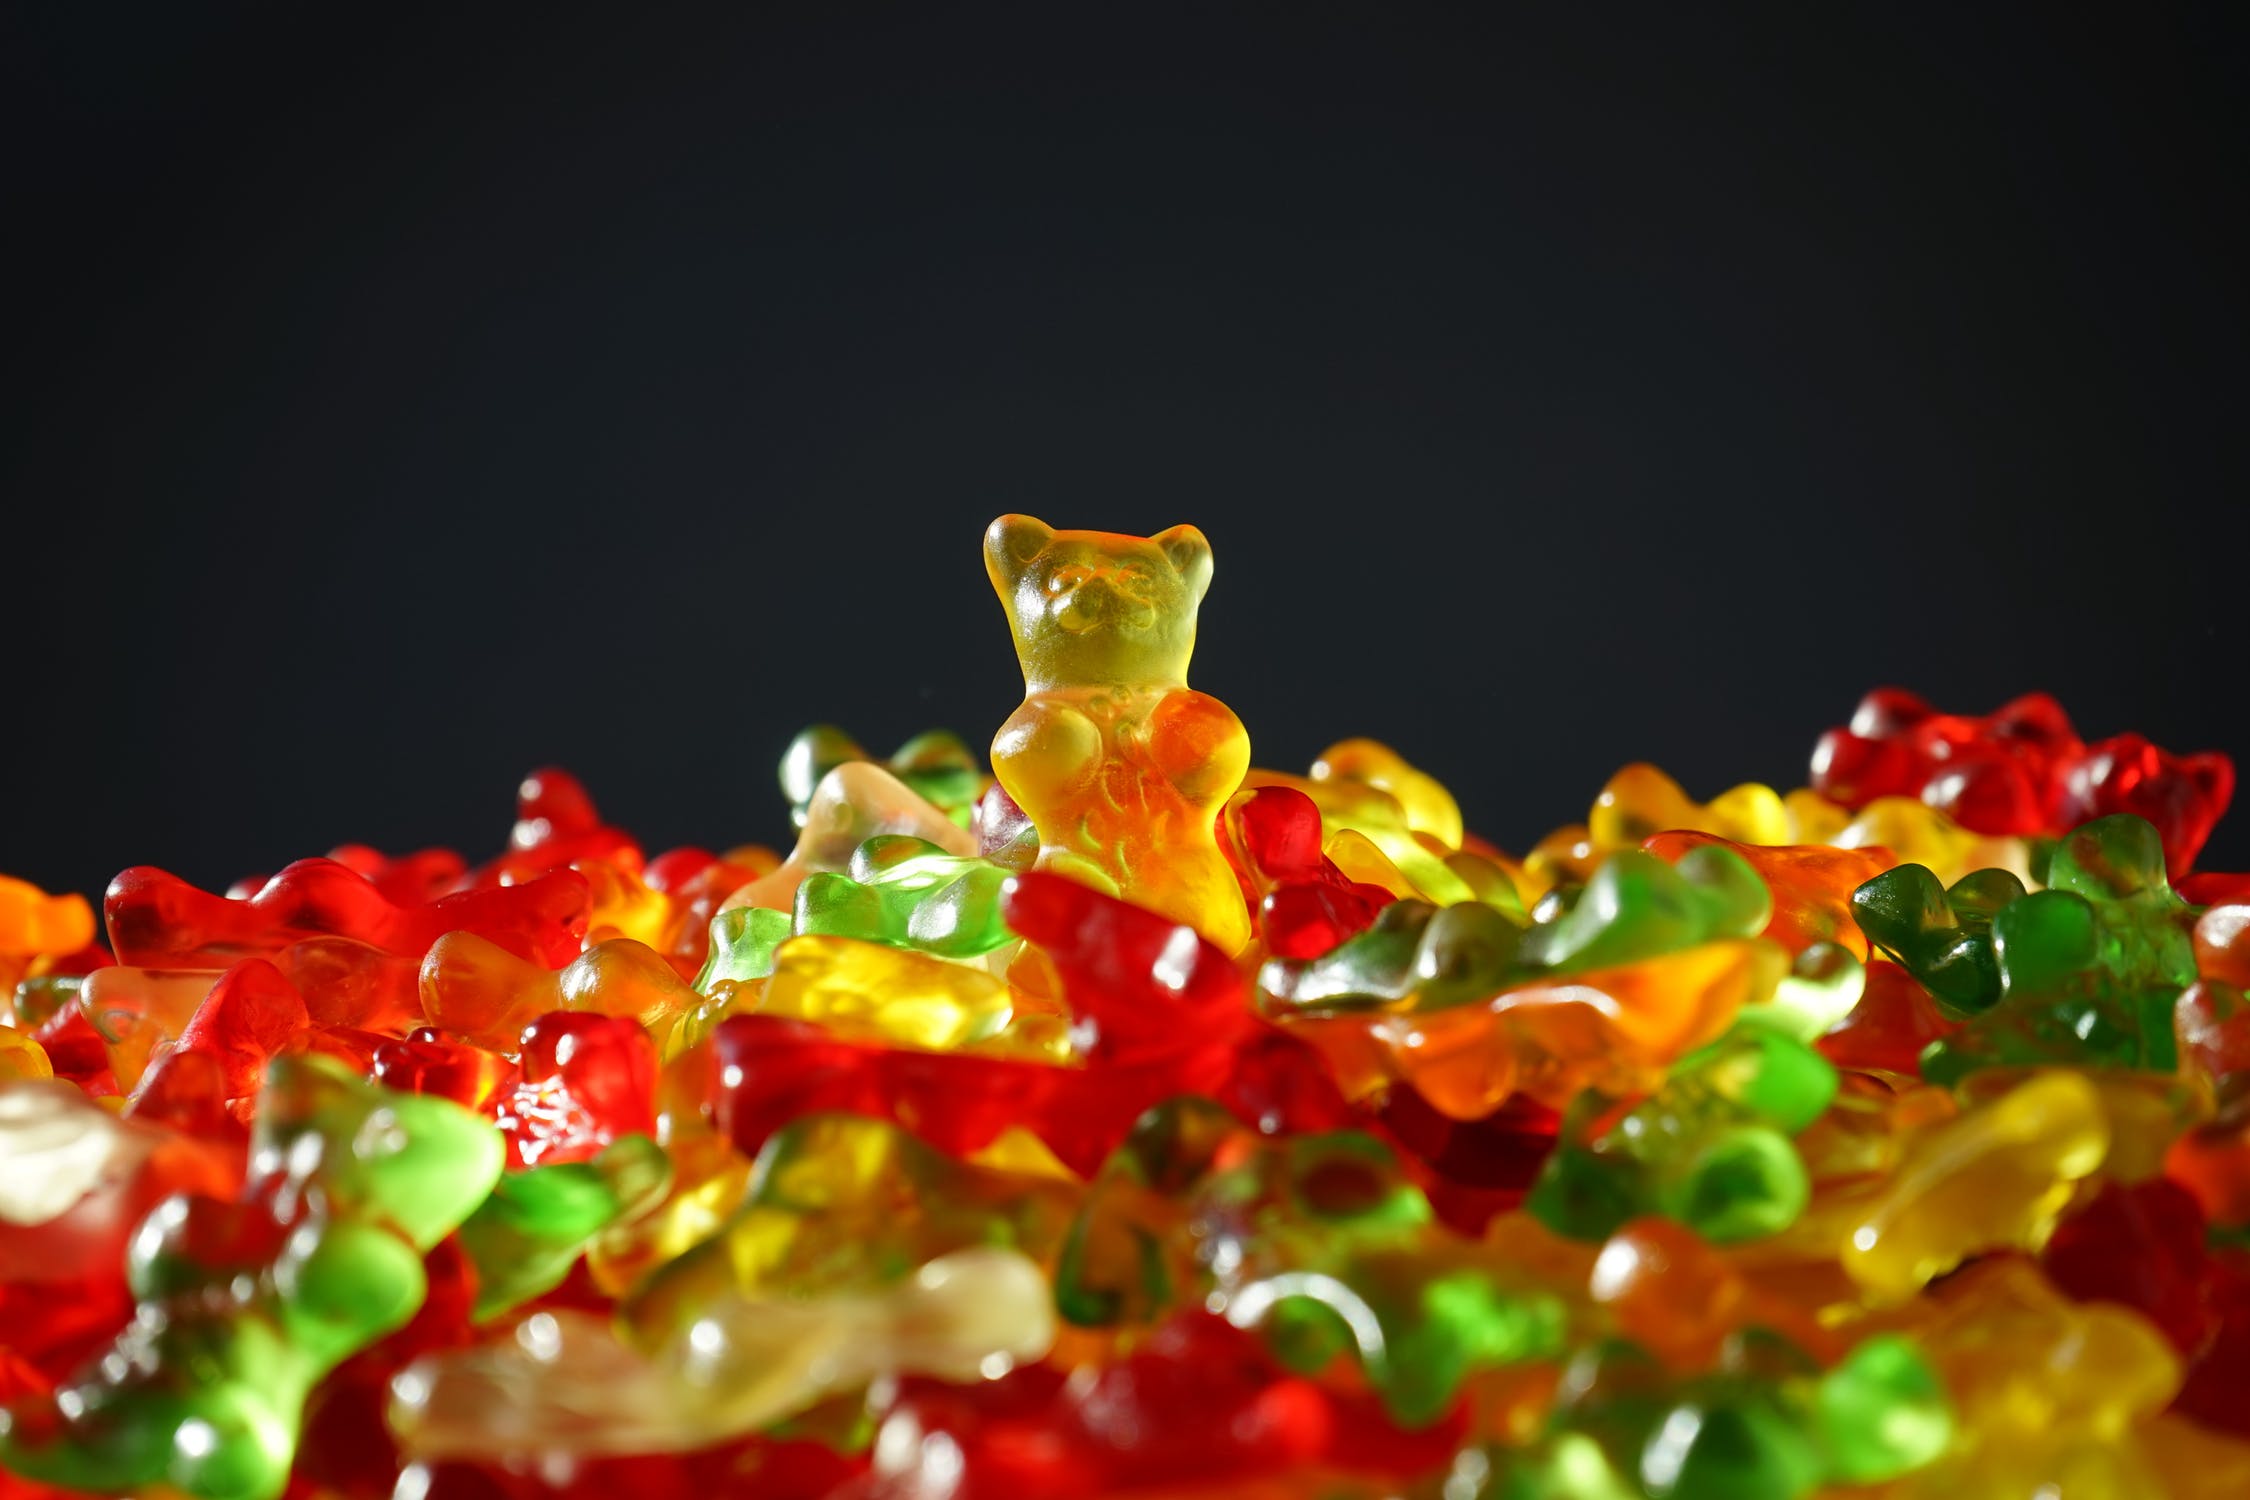 multiple gummy bears of varying colors